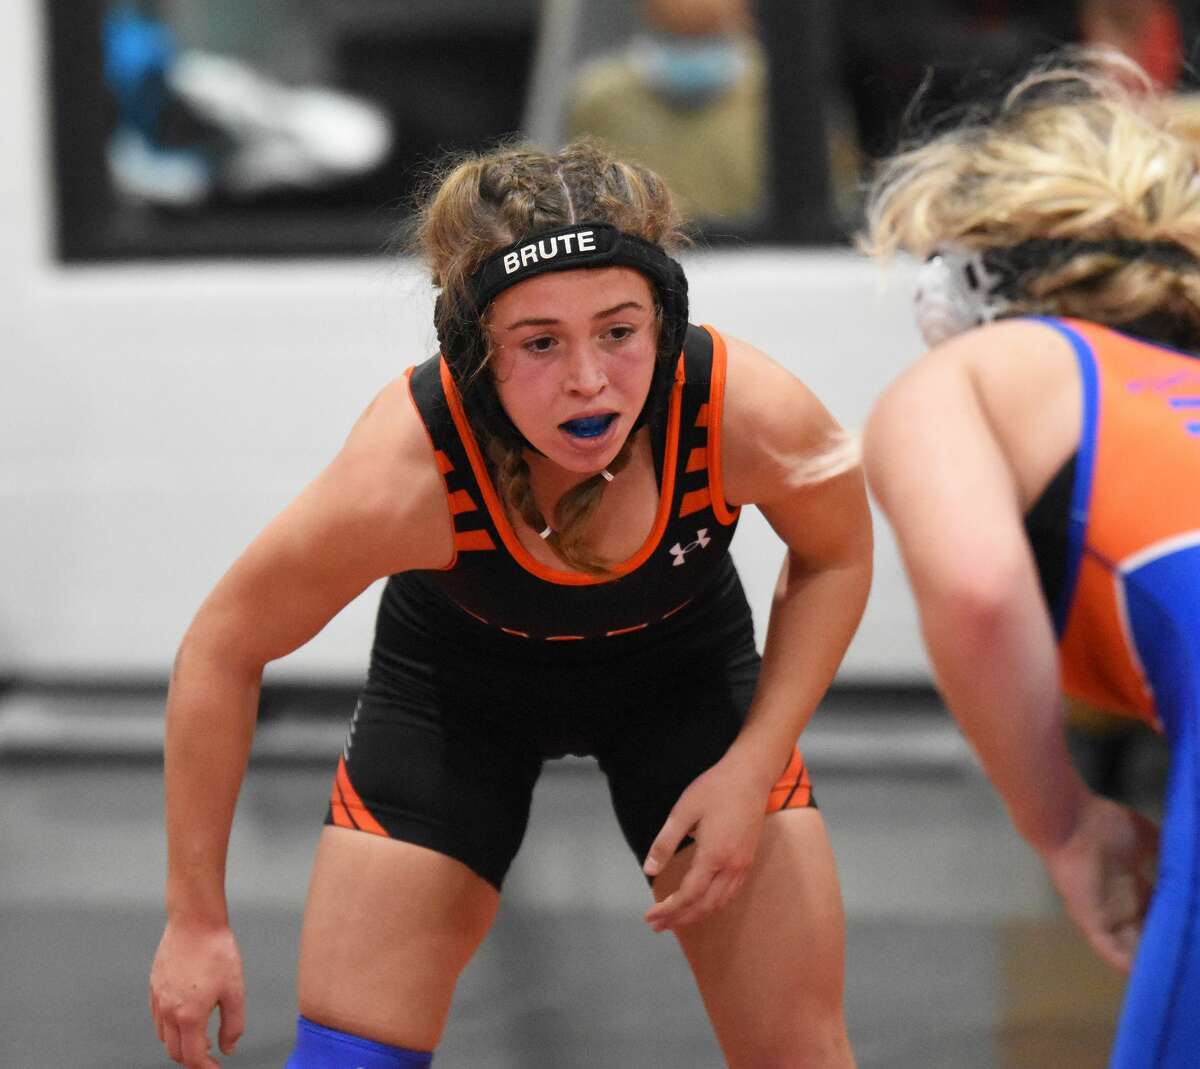 Edwardsville's Olivia Coll catches her breath during her match inside the Jon Davis Wrestling Center in Edwardsville. Coll went 3-2 in the 101-pound weight class of the Wonder Woman Tournament.